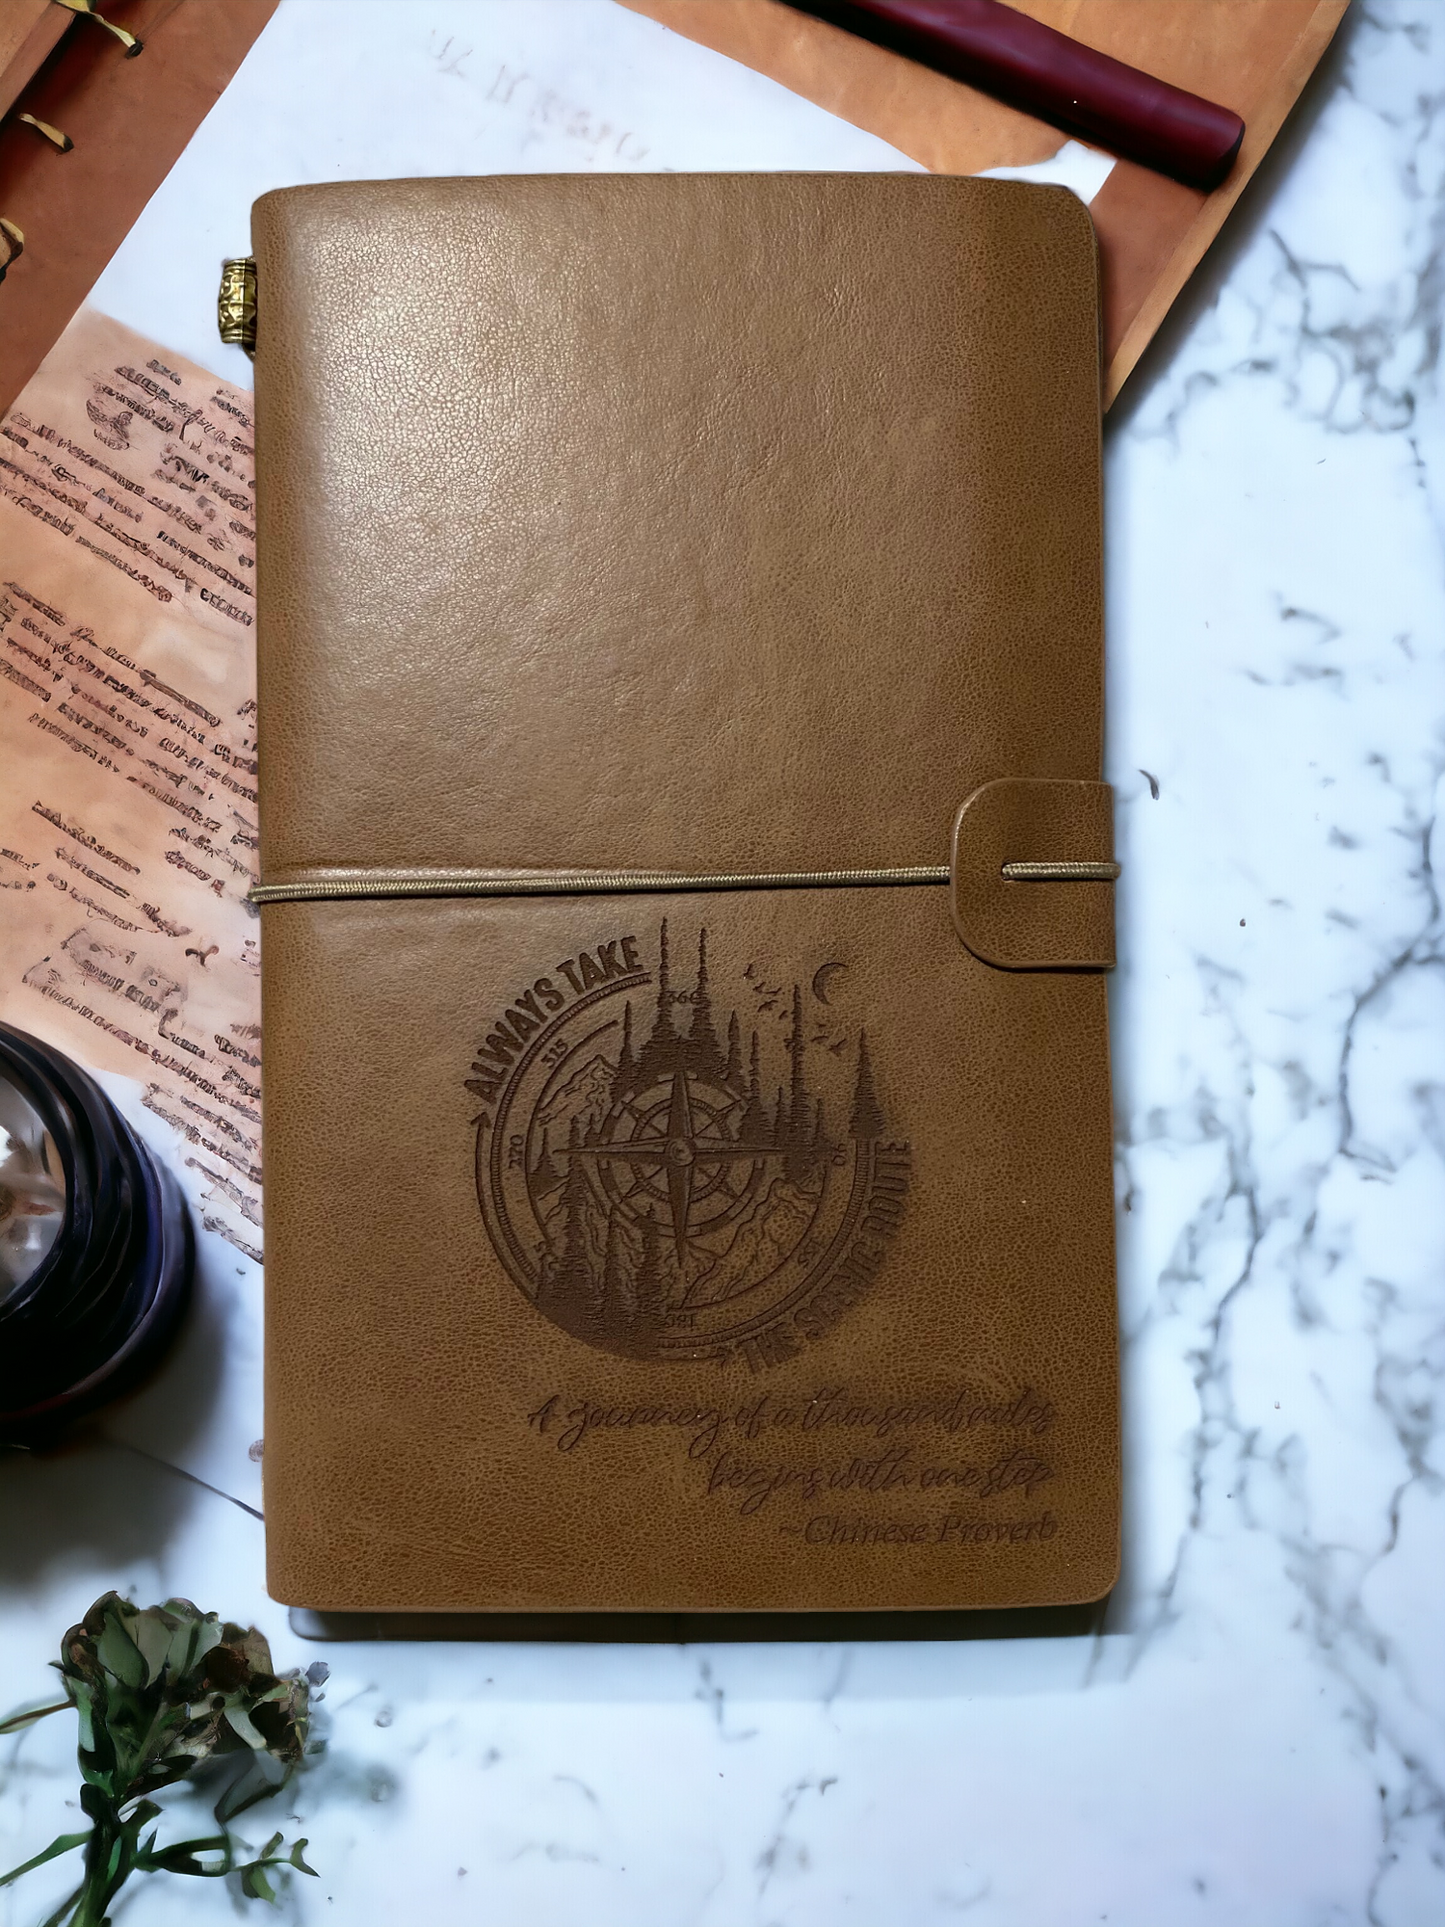 Engraved Leatherette Travel Journal, a journey of a thousand miles begins with one step.